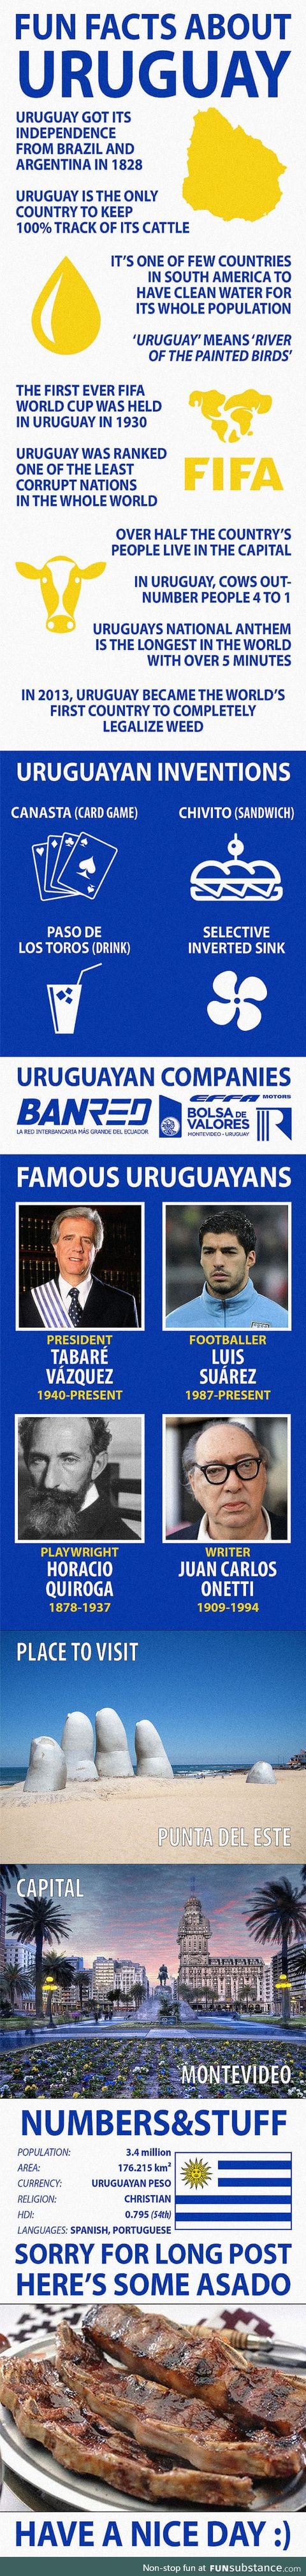 Fun Facts about Uruguay